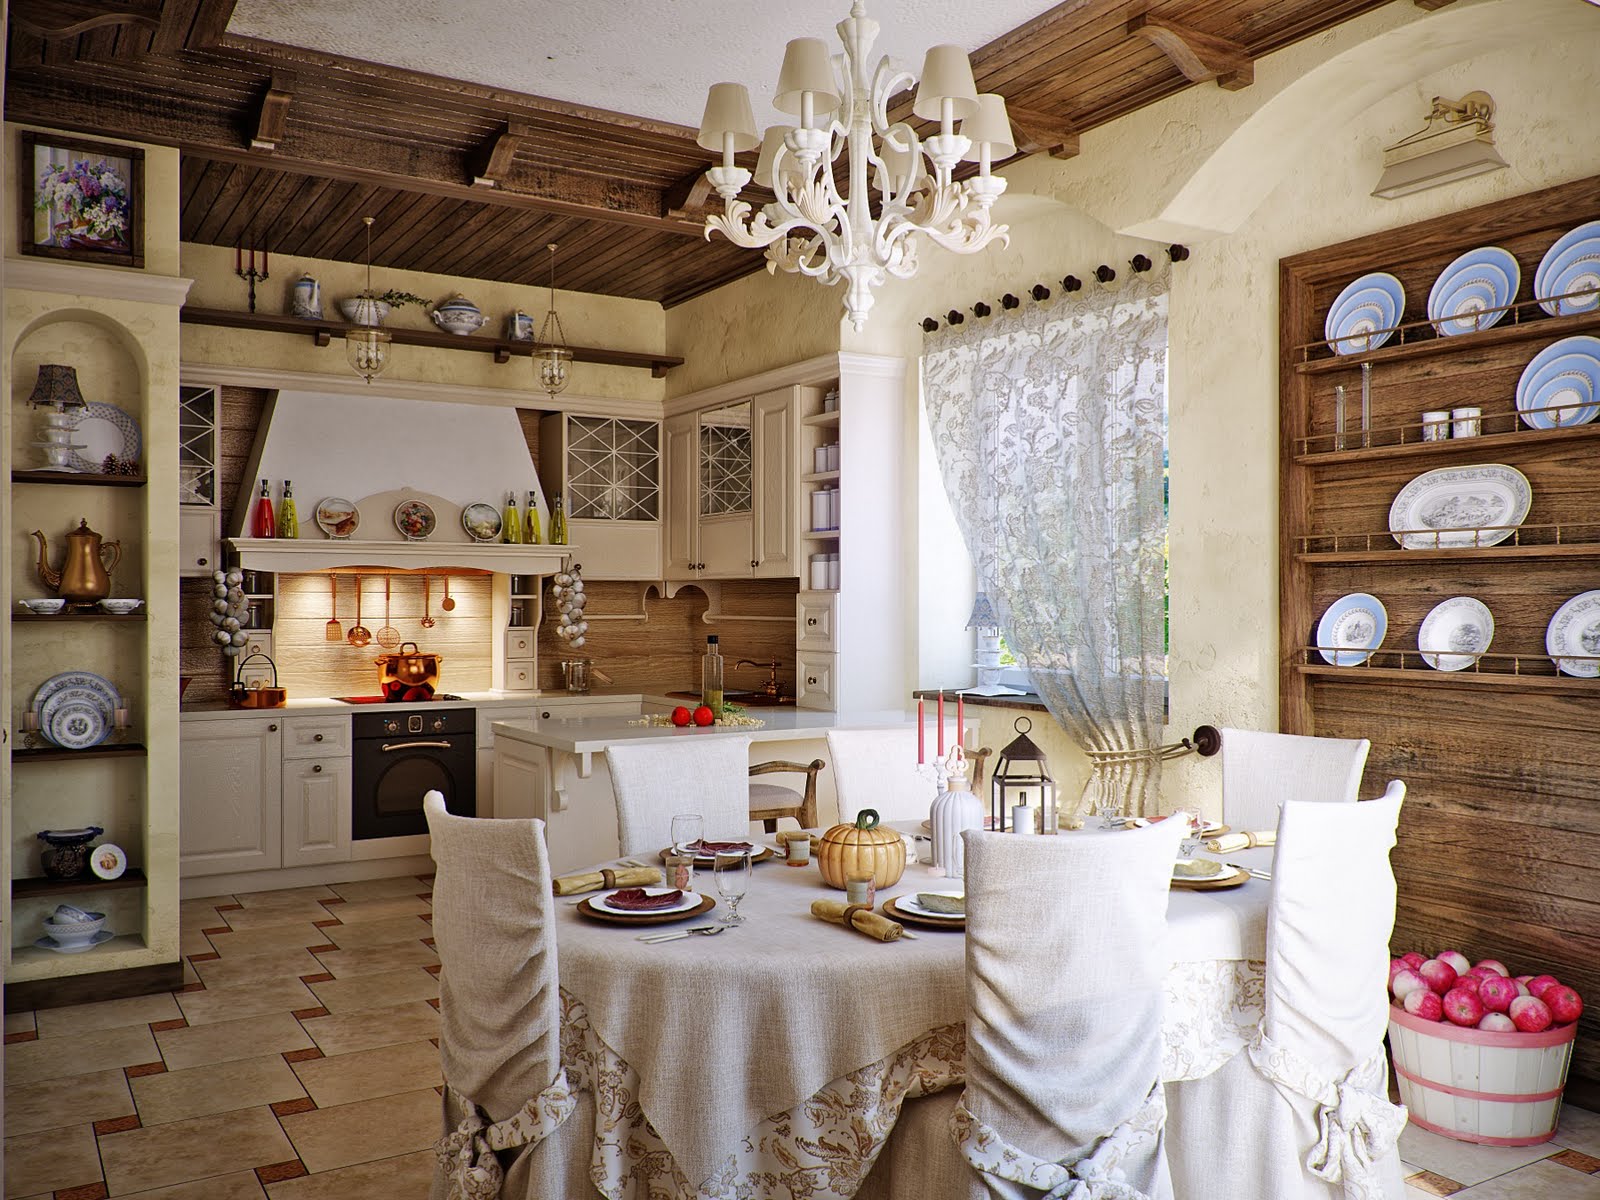 country kitchen designs interior svetlana attractive inspire kitchens style decorating chic decor cuisine house decorate inspiration architecture cucina decoholic looking